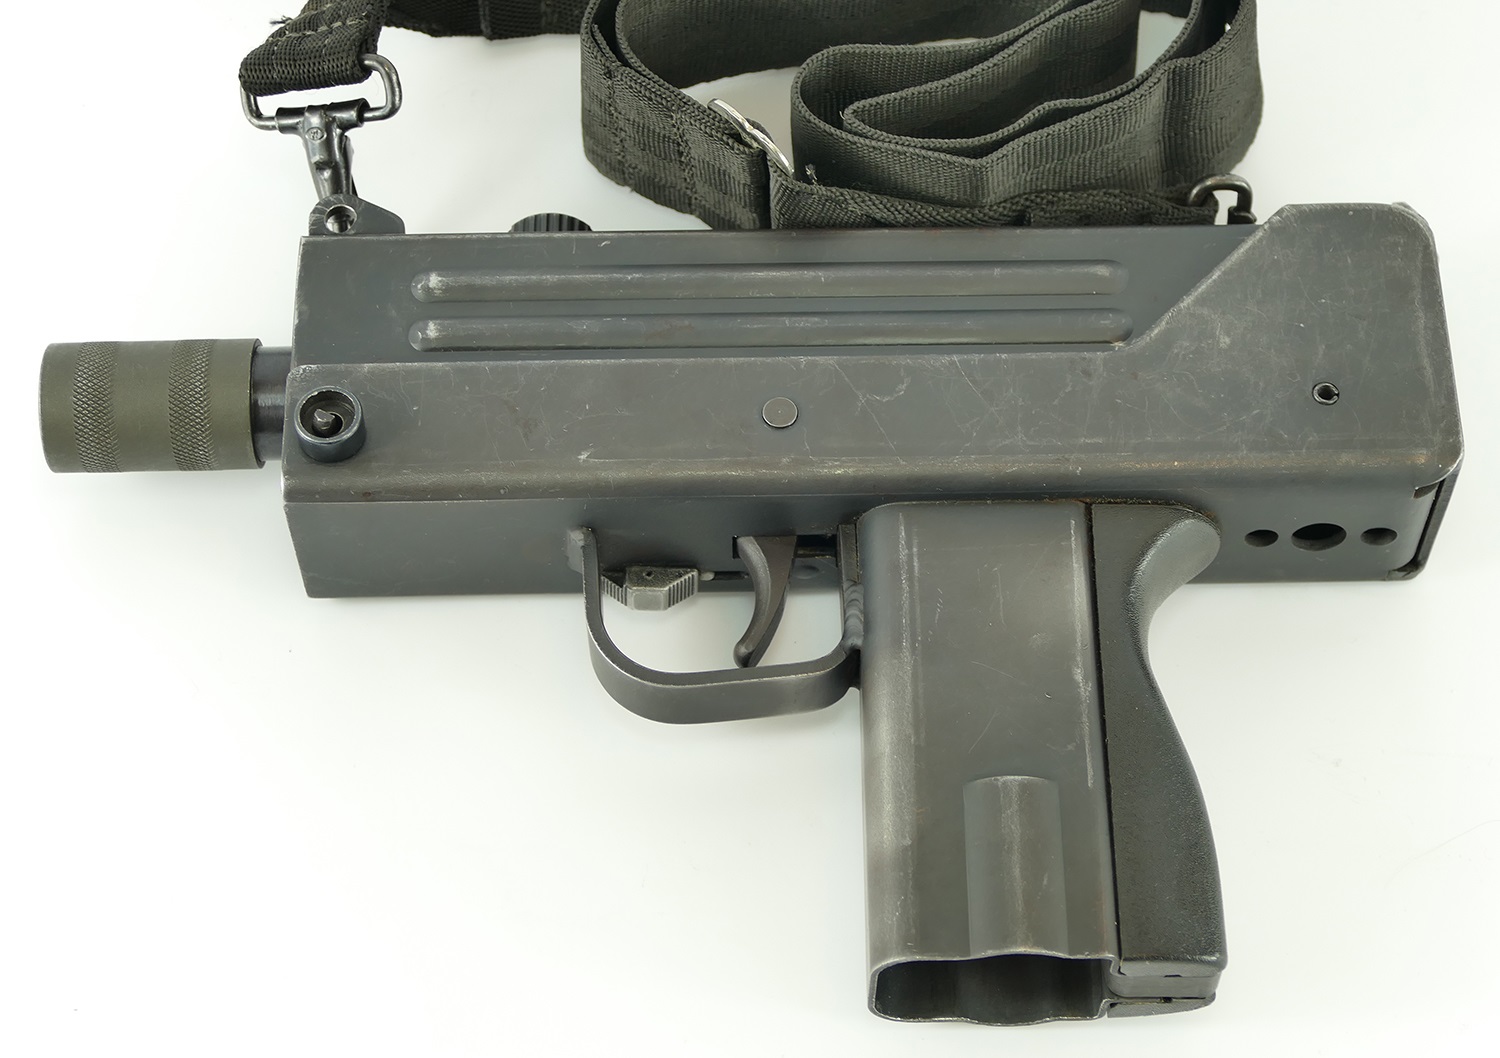 The MAC-10 Submachine Gun Was a Terror in the Movies (Just Not in Real